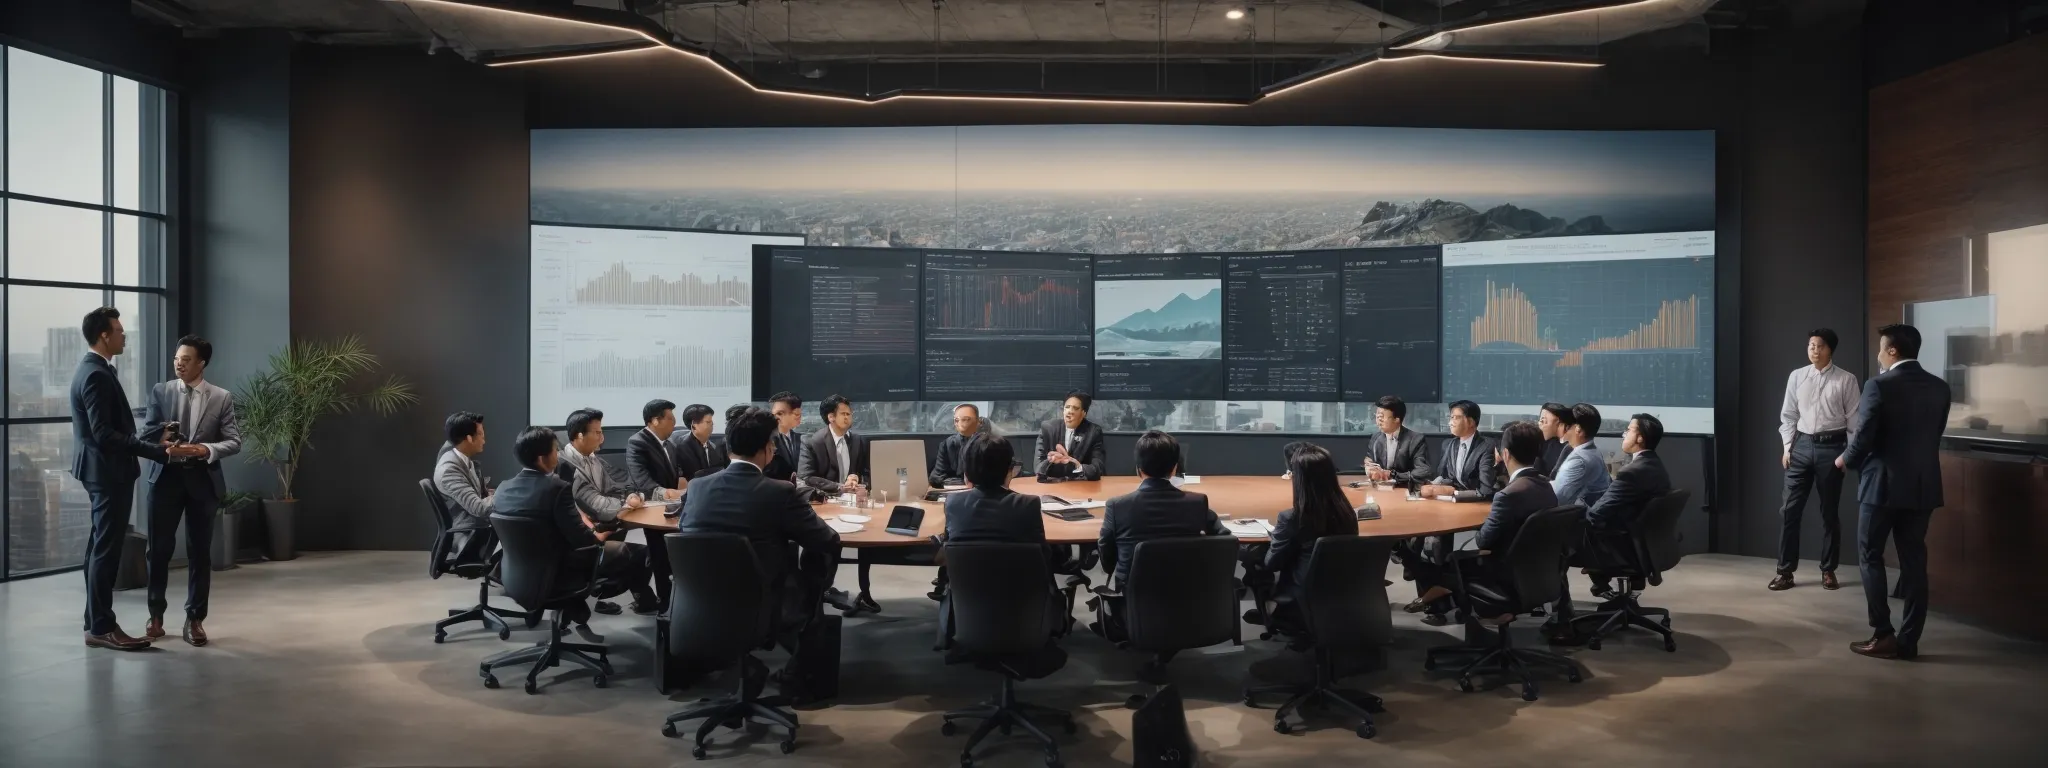 a modern meeting room with a large screen displaying ai and seo trends, where a diverse team of professionals is engaged in a strategic planning session.